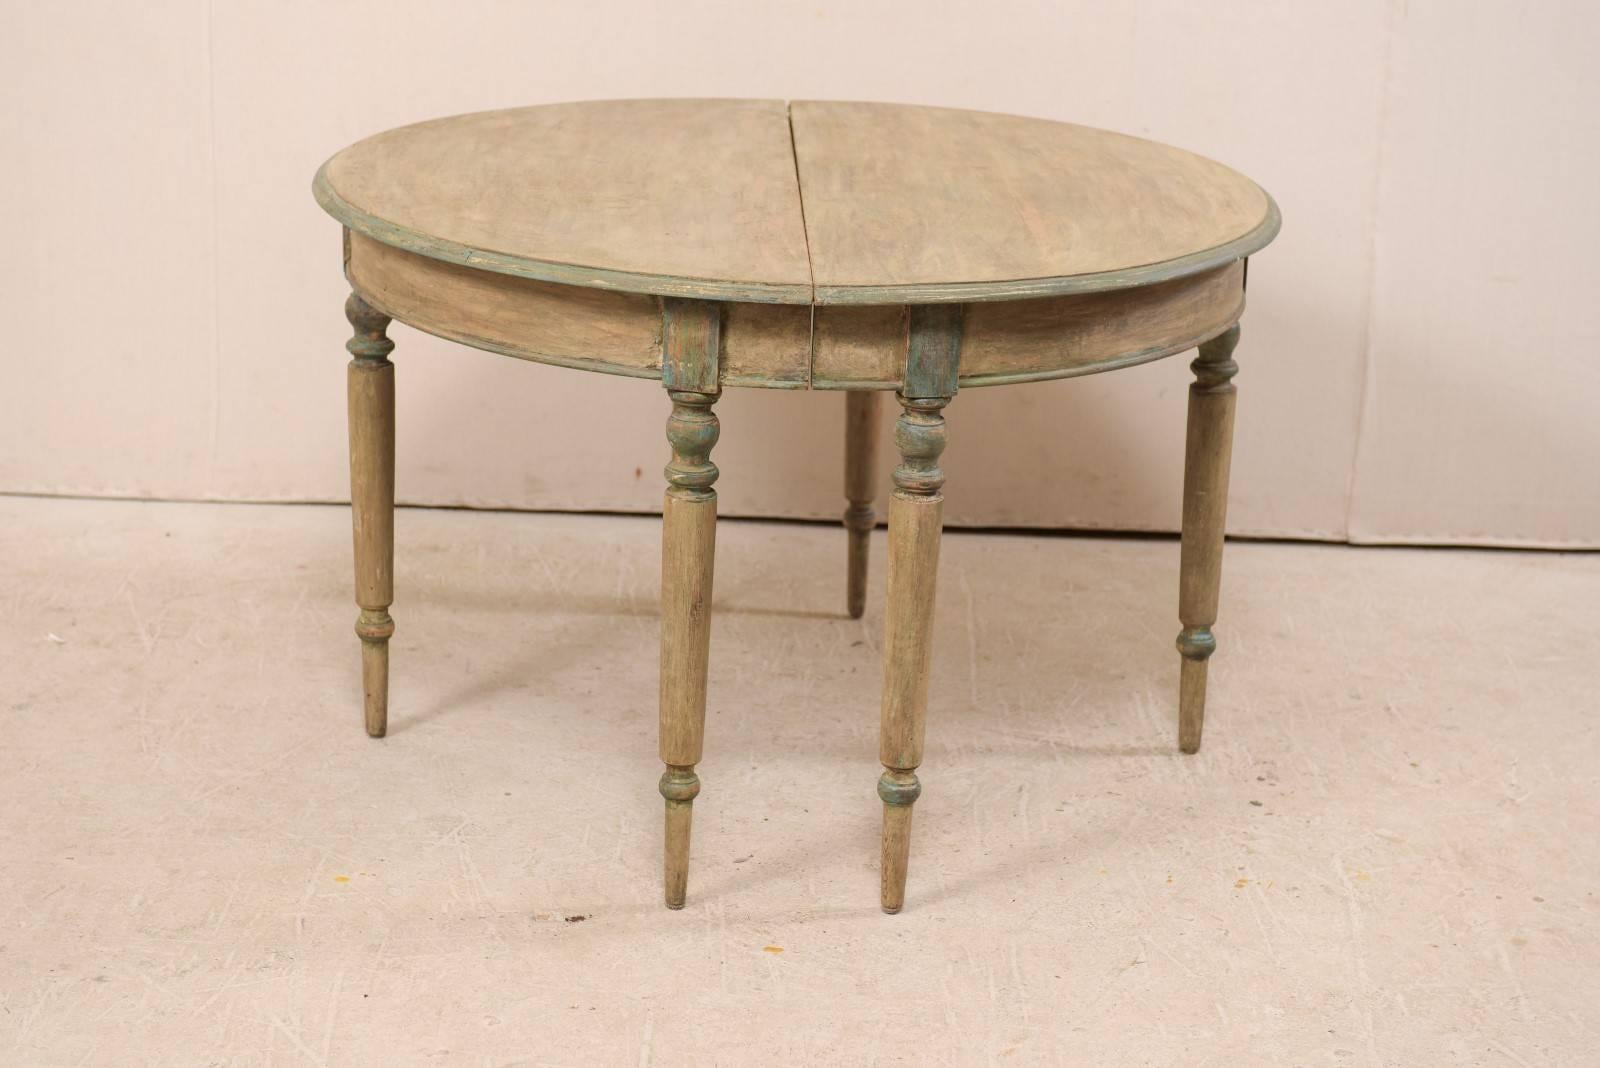 Pair of 19th Century Swedish Painted Wood Demi-Lune Tables with Turned Legs 5